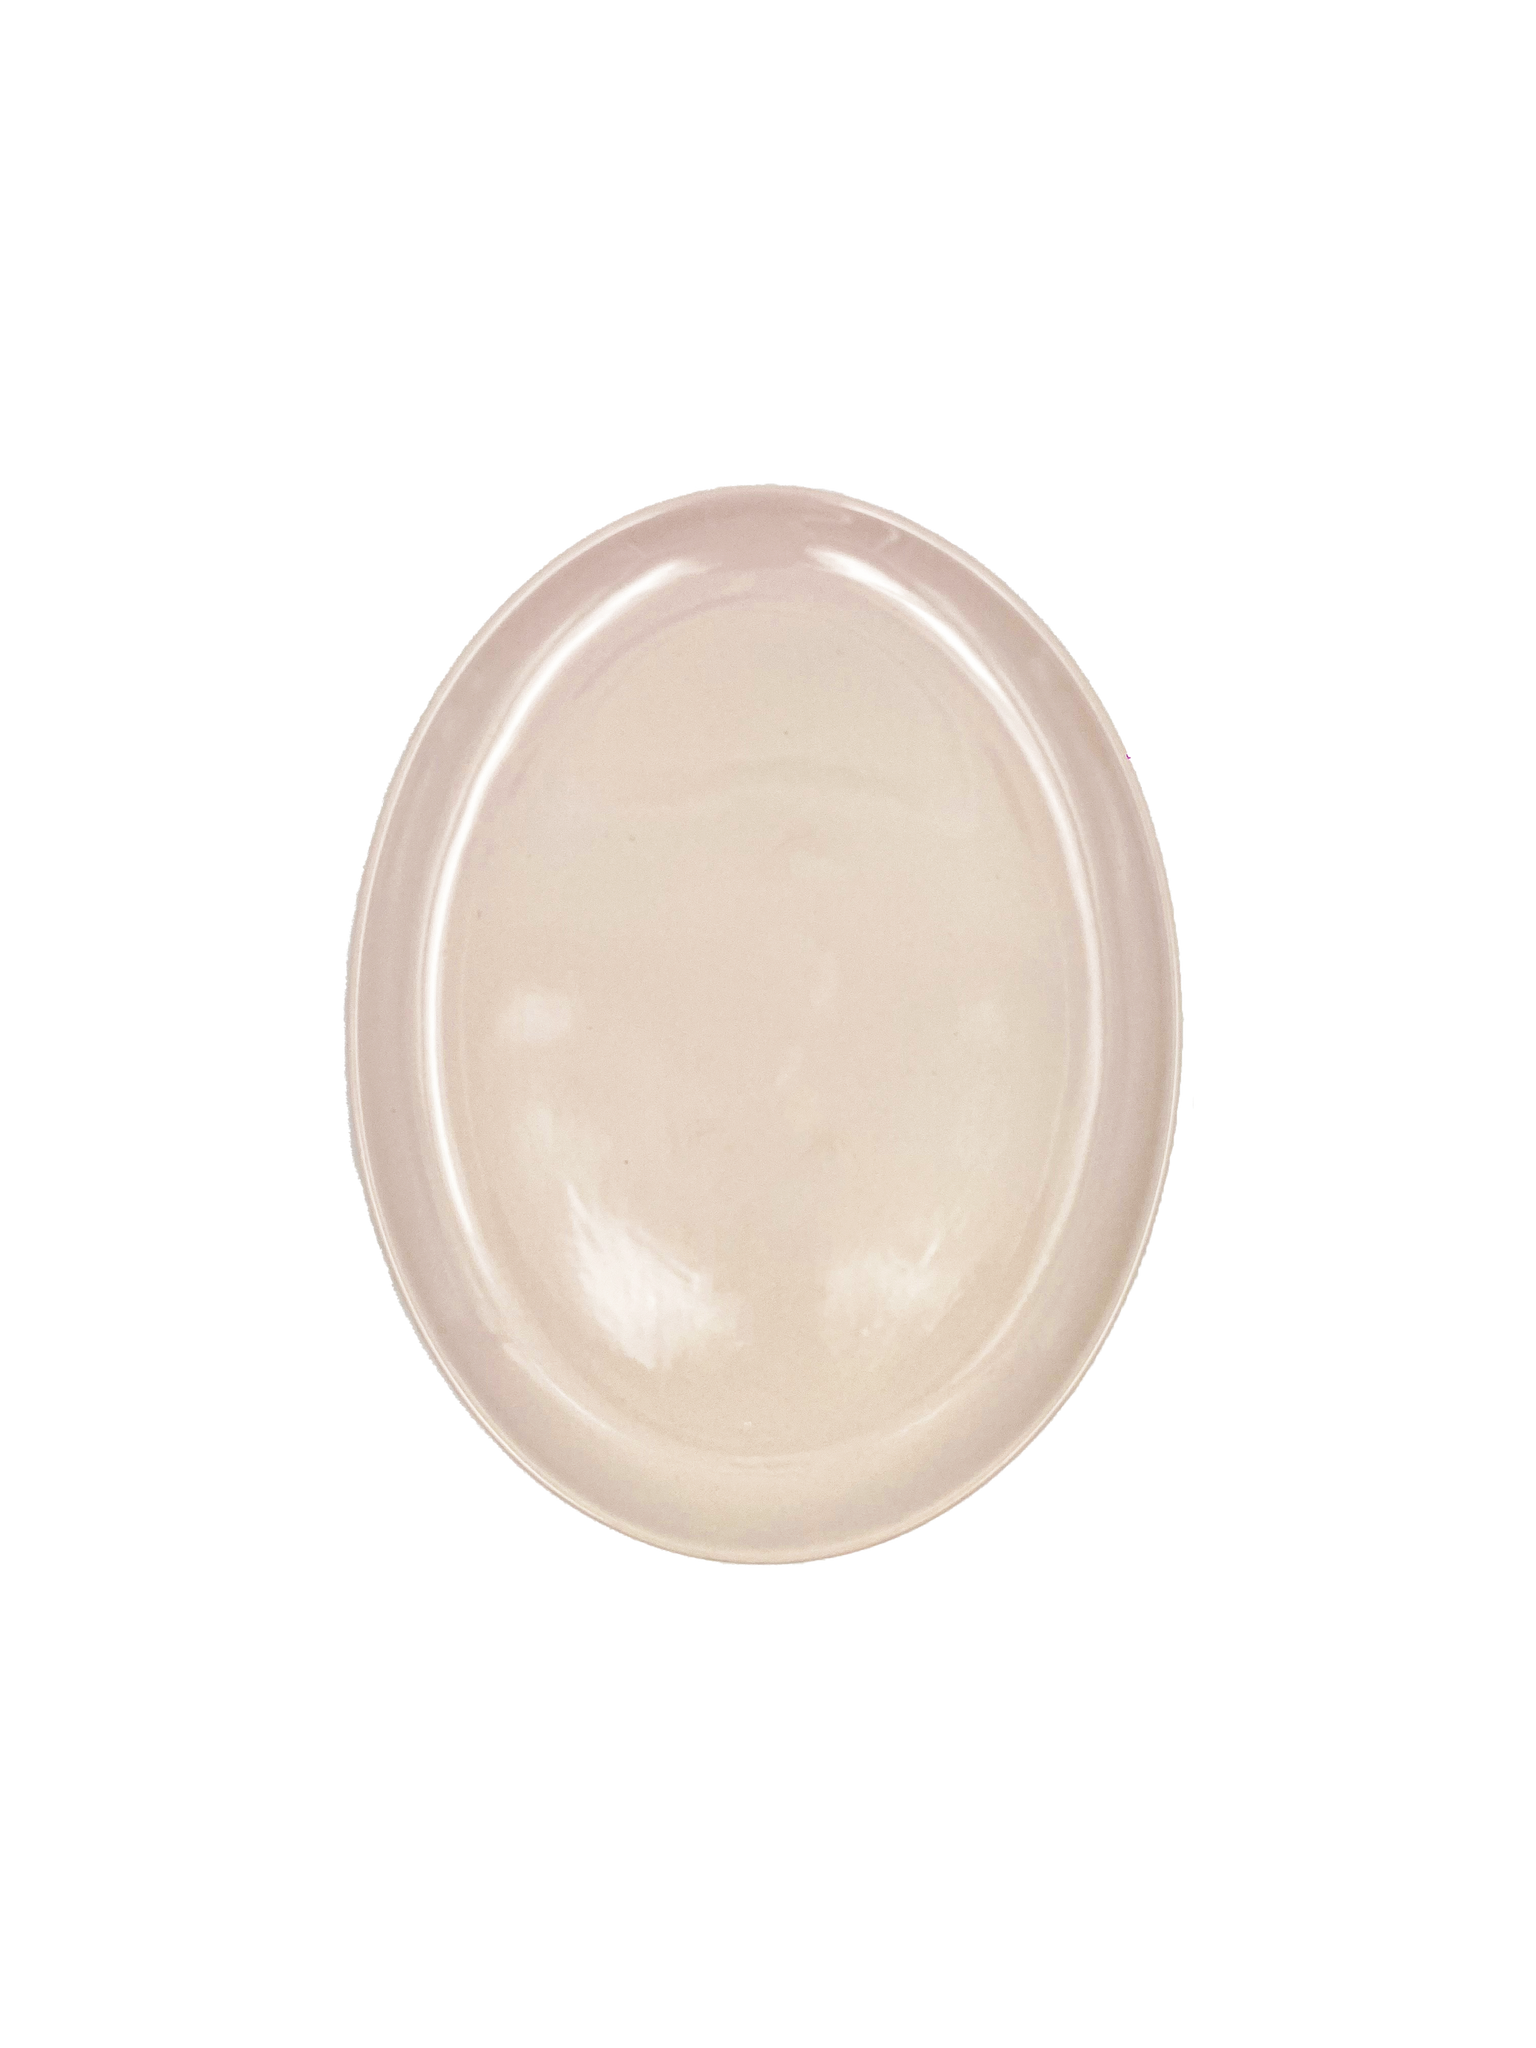 Shell Bisque Medium Oval Plate- Soft Pink- Set of 4